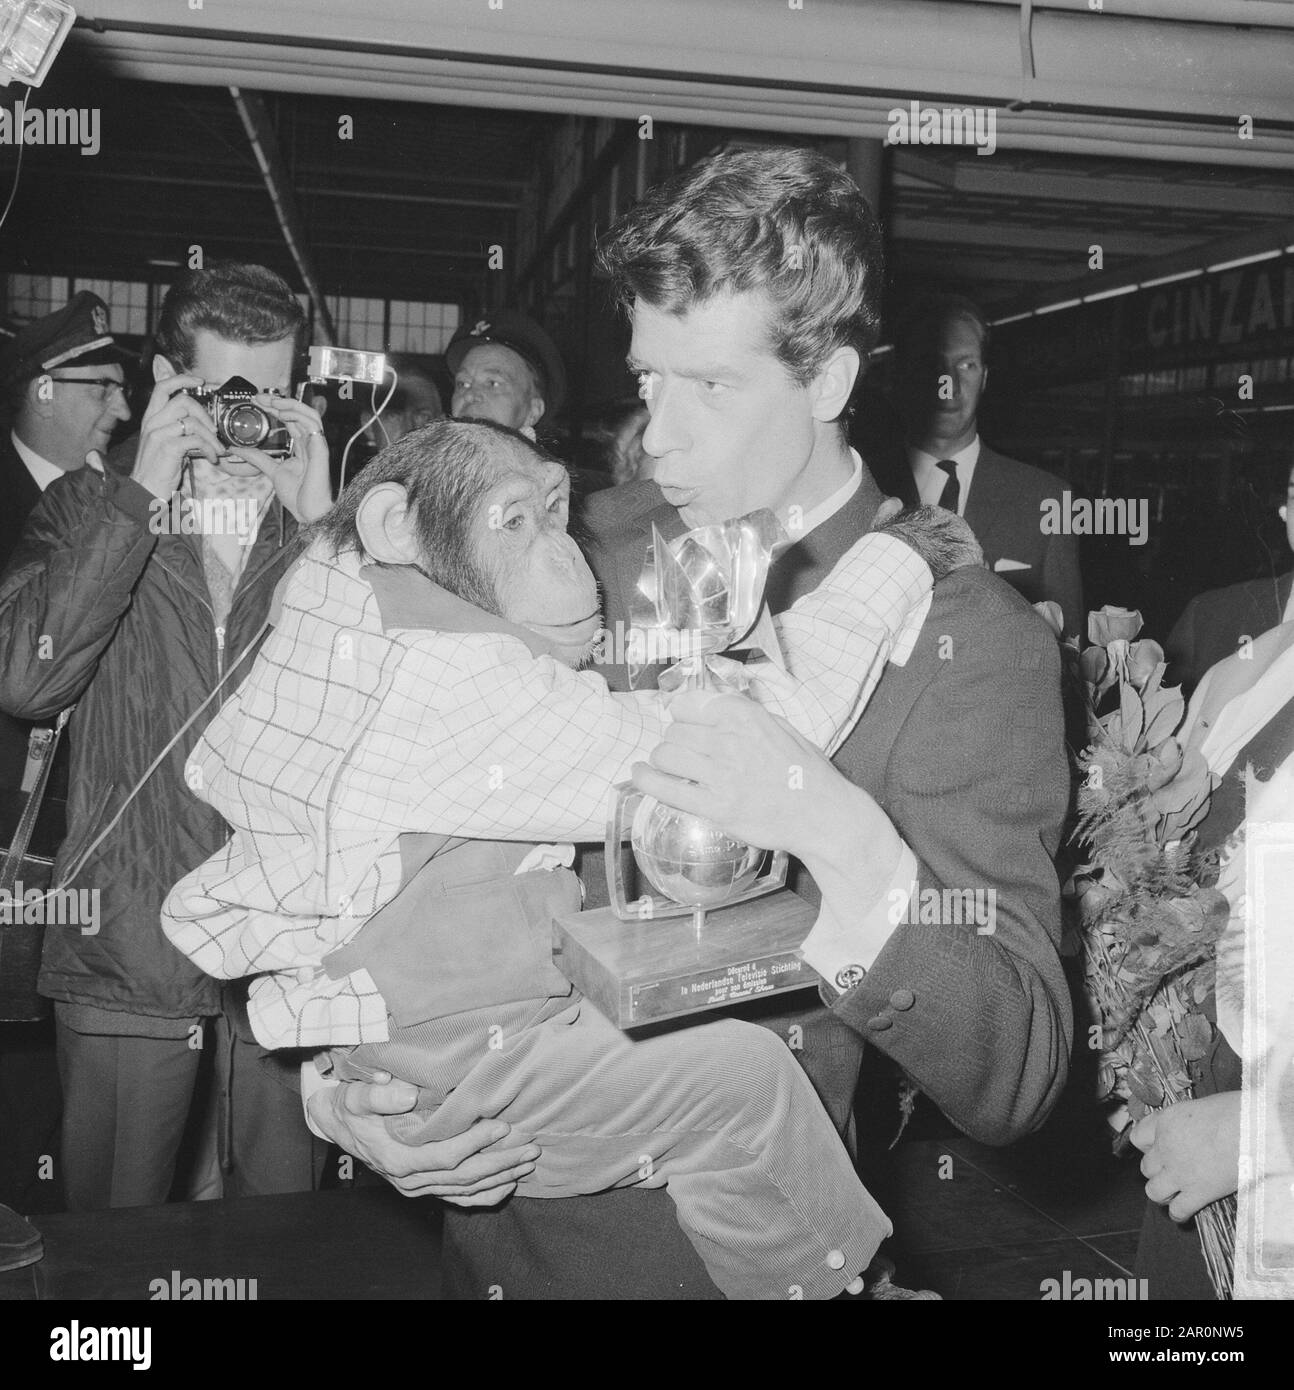 Rudi Carrell won the silver rose. Rudi Carrell with the chimpanzee Plato who plays in his show Date: 25 april 1964 Location: Noord-Holland, Schiphol Keywords: chimpanzees Personal name: Carrell, Rudi Institution name: Silver Rose Stock Photo